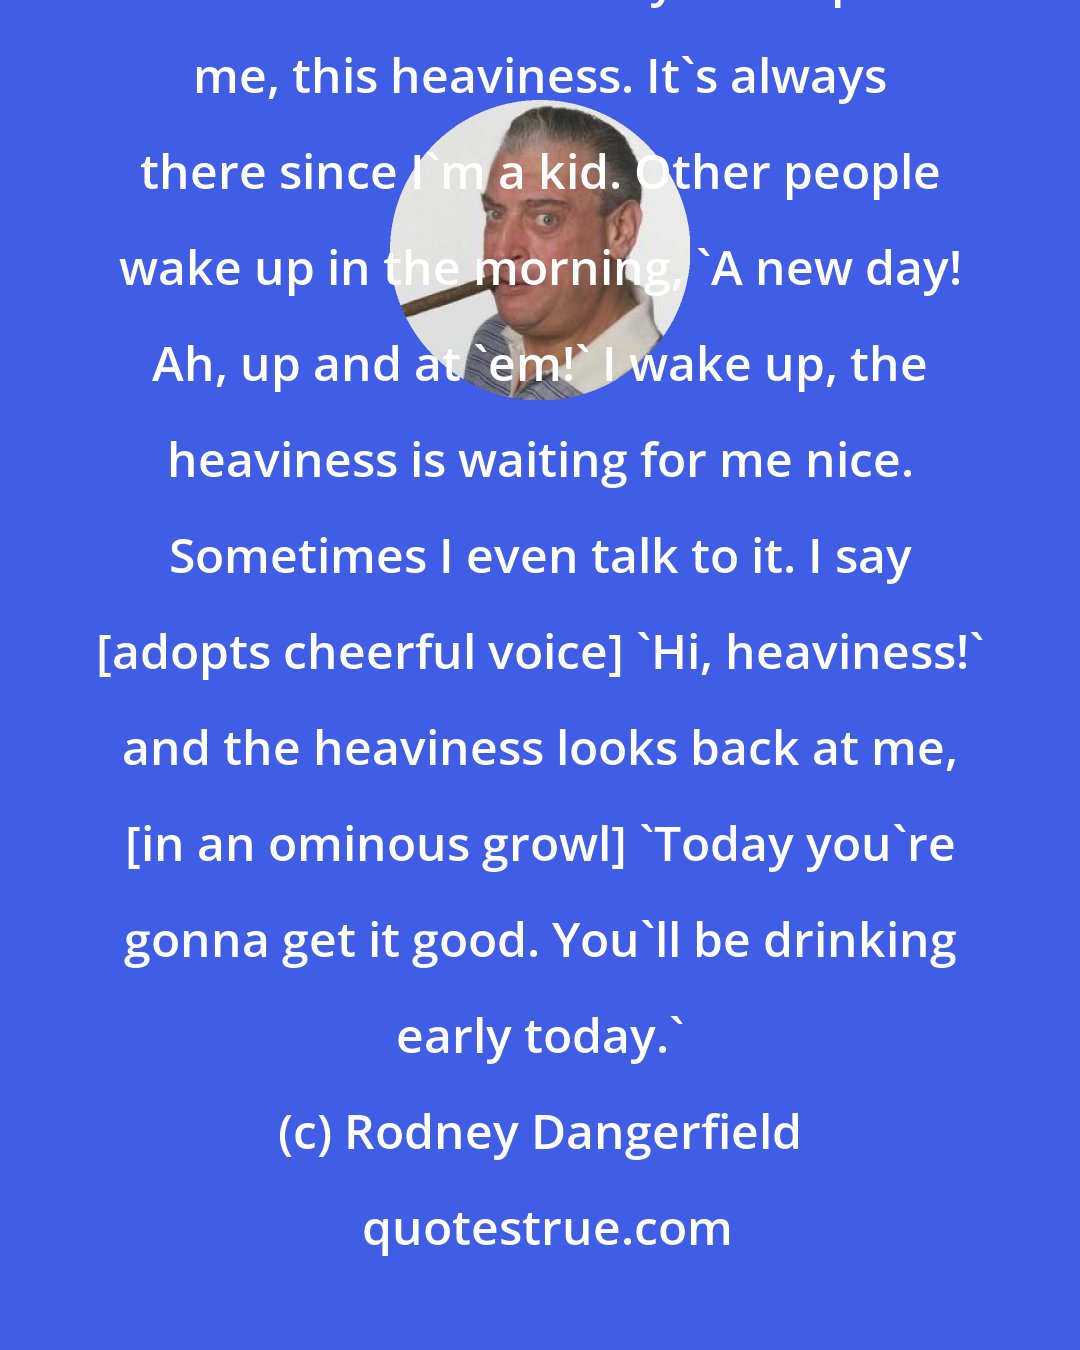 Rodney Dangerfield: My life is nothing but pressure. All pressure. This pressure is like a heaviness. It's always on top of me, this heaviness. It's always there since I'm a kid. Other people wake up in the morning, 'A new day! Ah, up and at 'em!' I wake up, the heaviness is waiting for me nice. Sometimes I even talk to it. I say [adopts cheerful voice] 'Hi, heaviness!' and the heaviness looks back at me, [in an ominous growl] 'Today you're gonna get it good. You'll be drinking early today.'